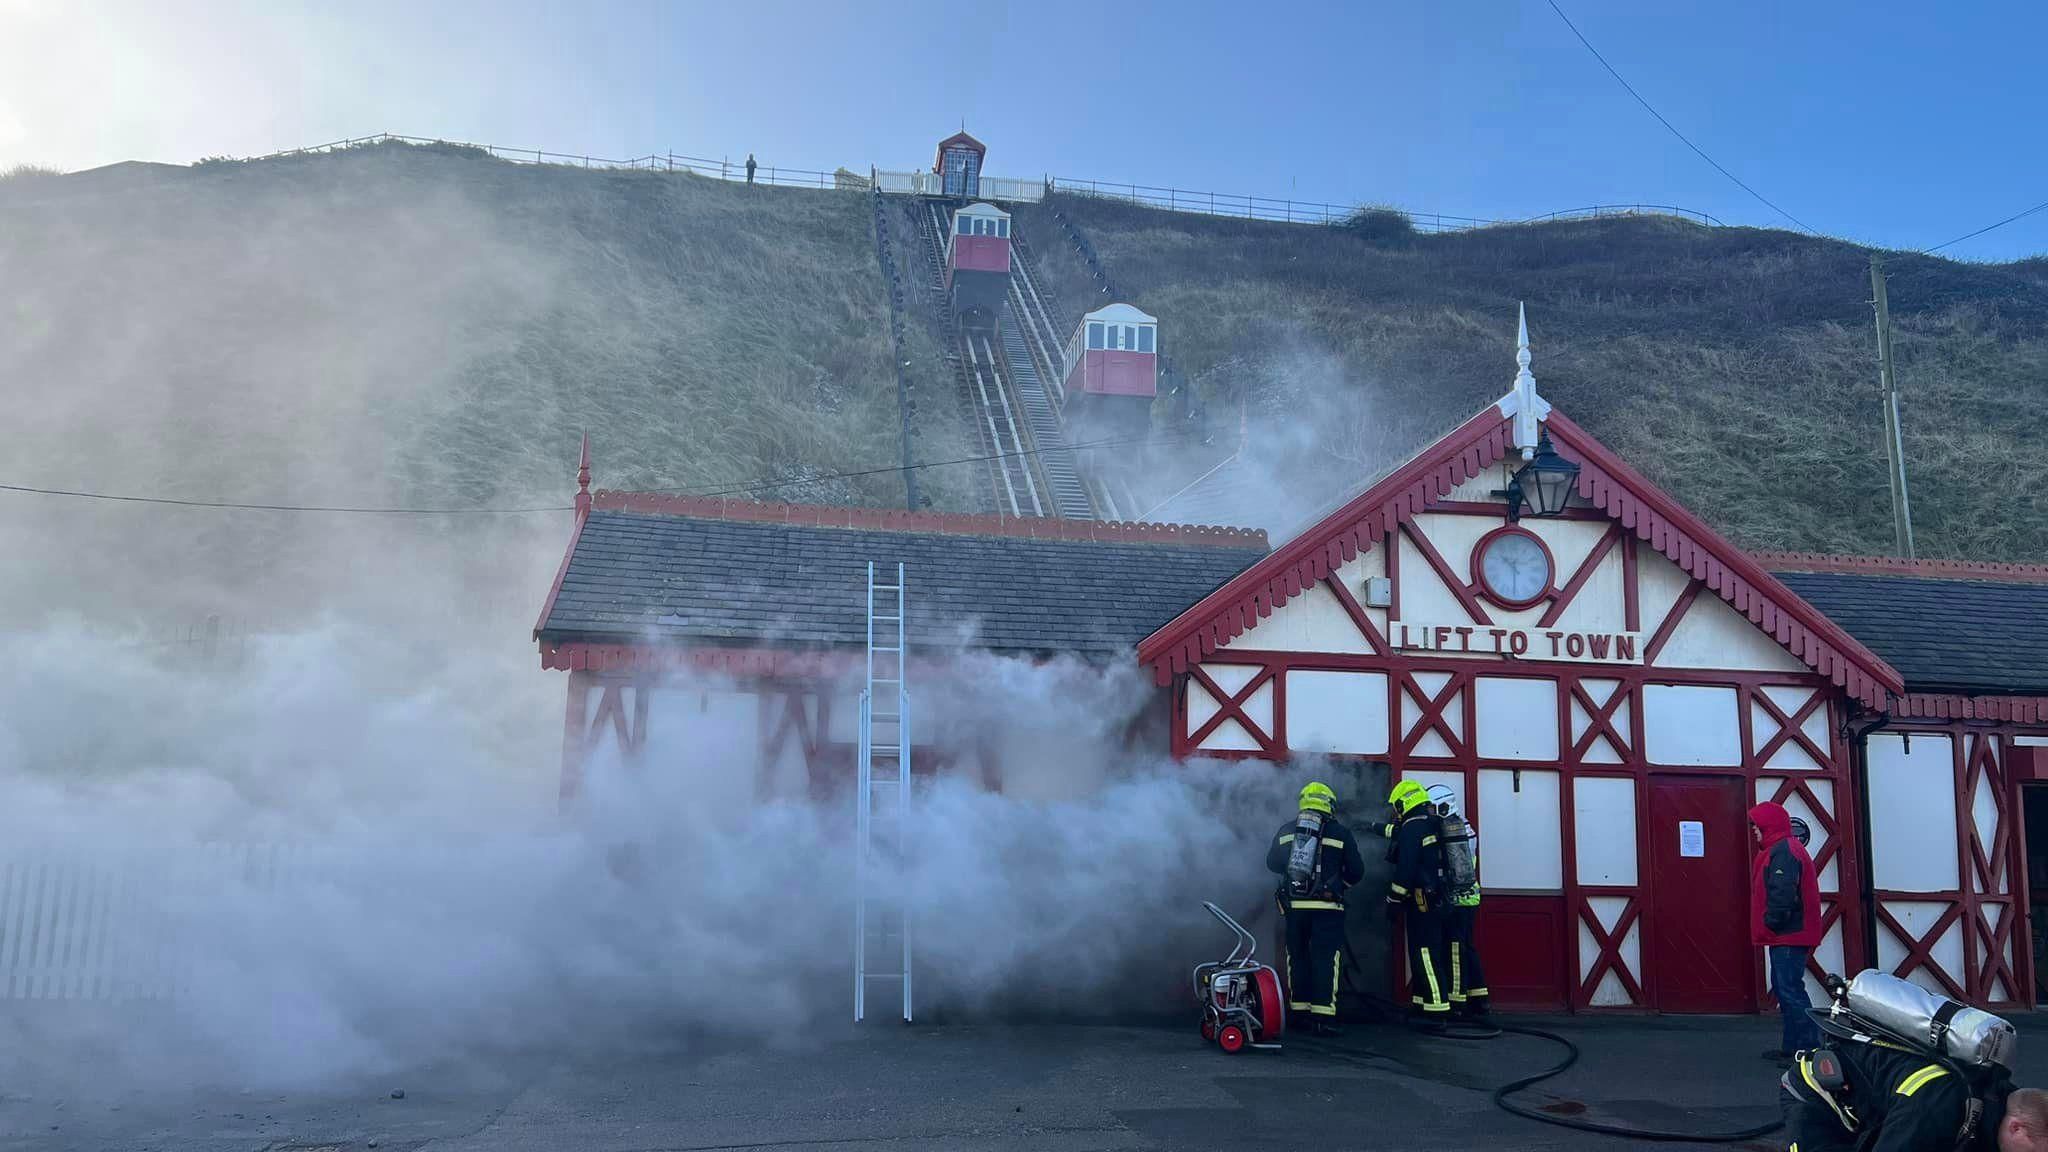 Firefighters at Saltburn